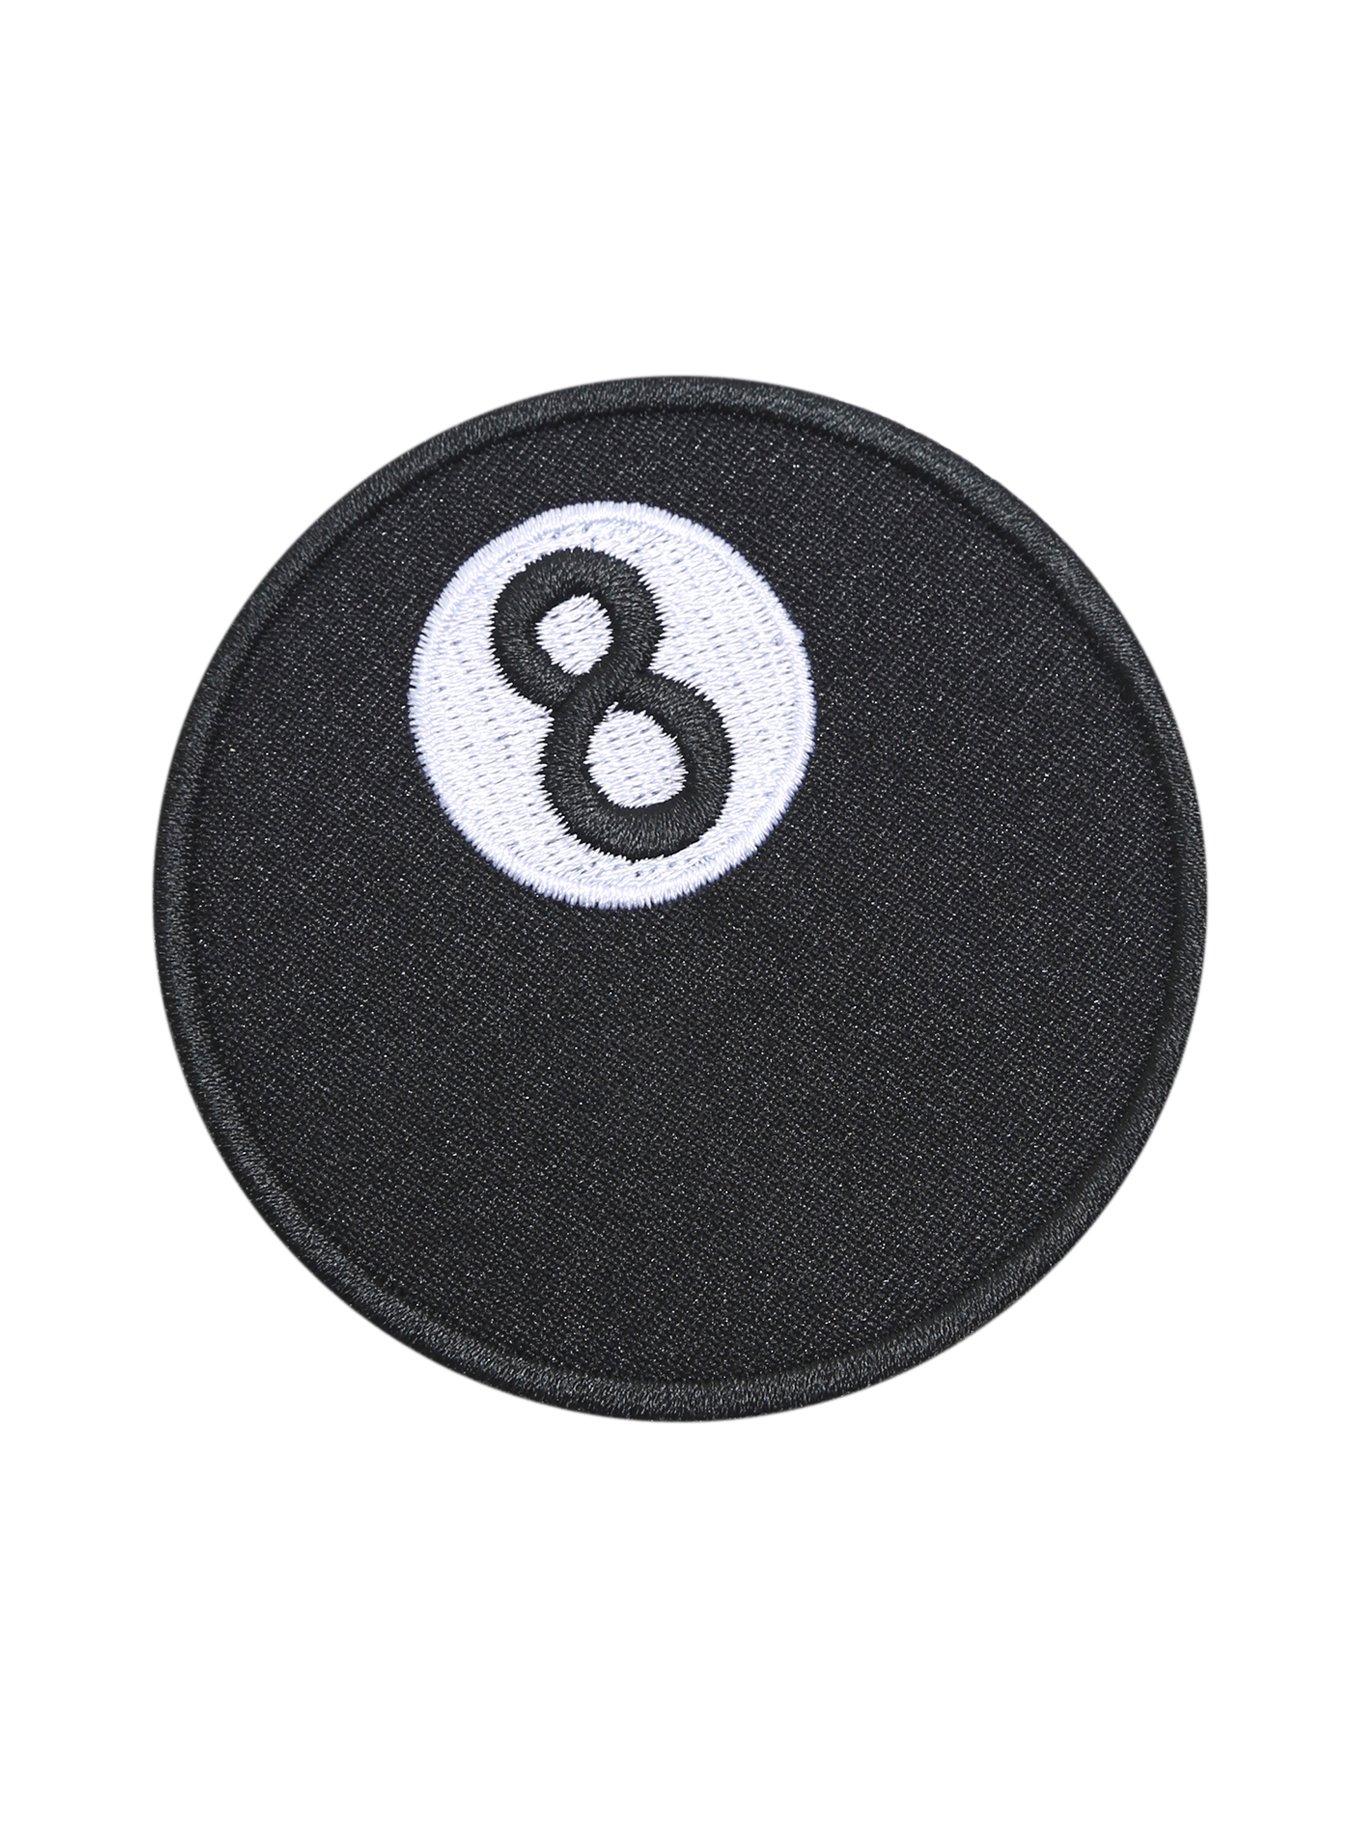 Eight Ball Patch, , hi-res